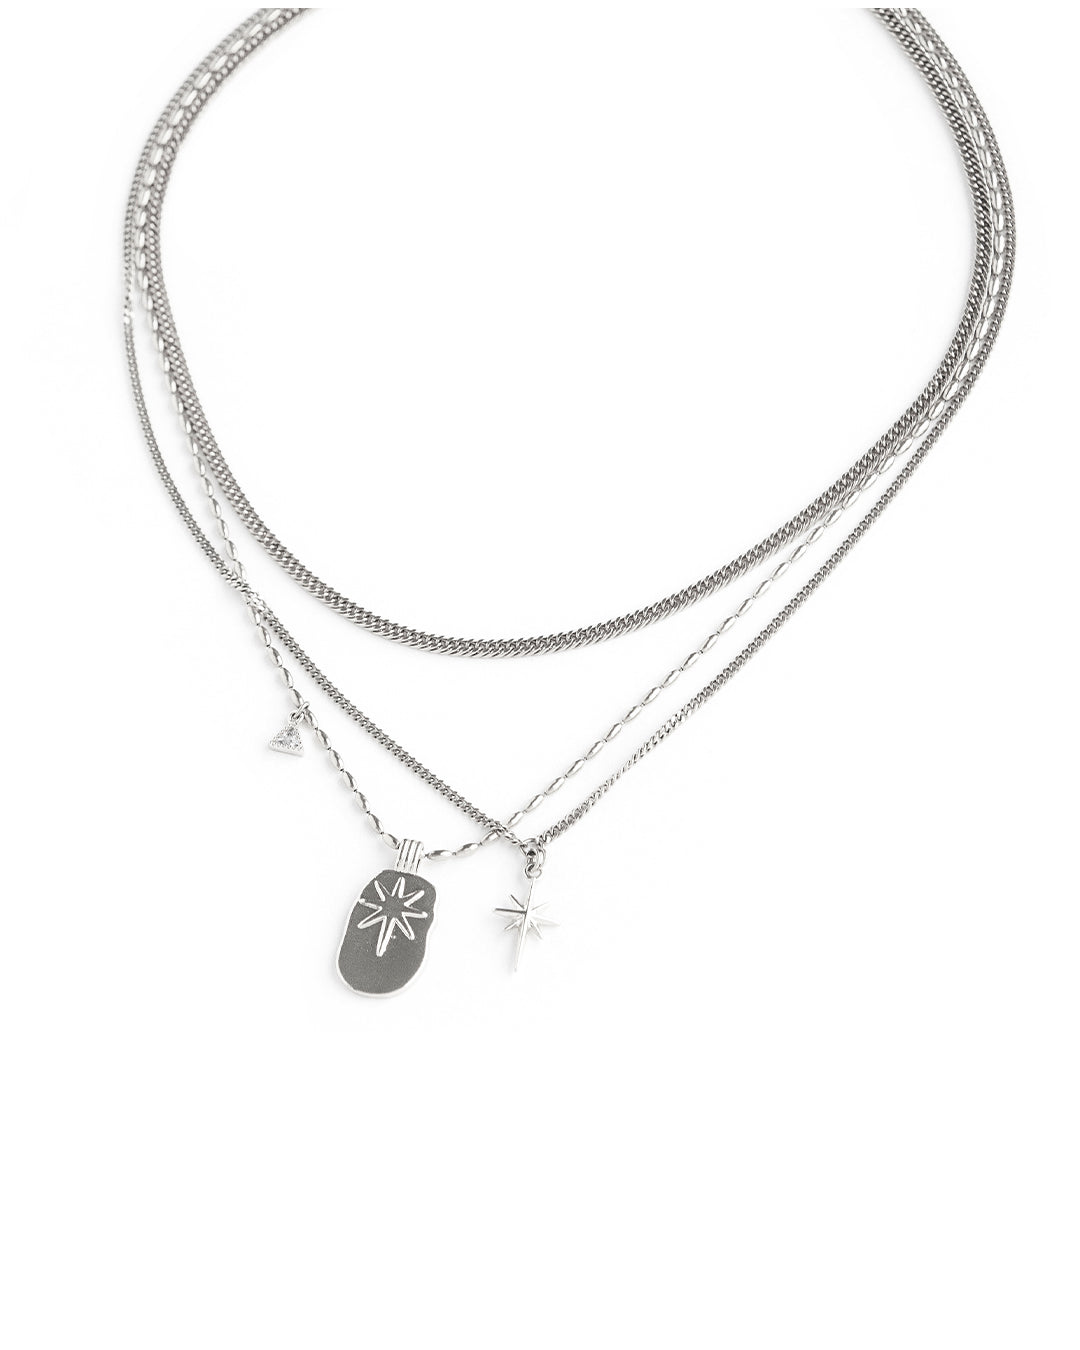 Paola Silver Necklace